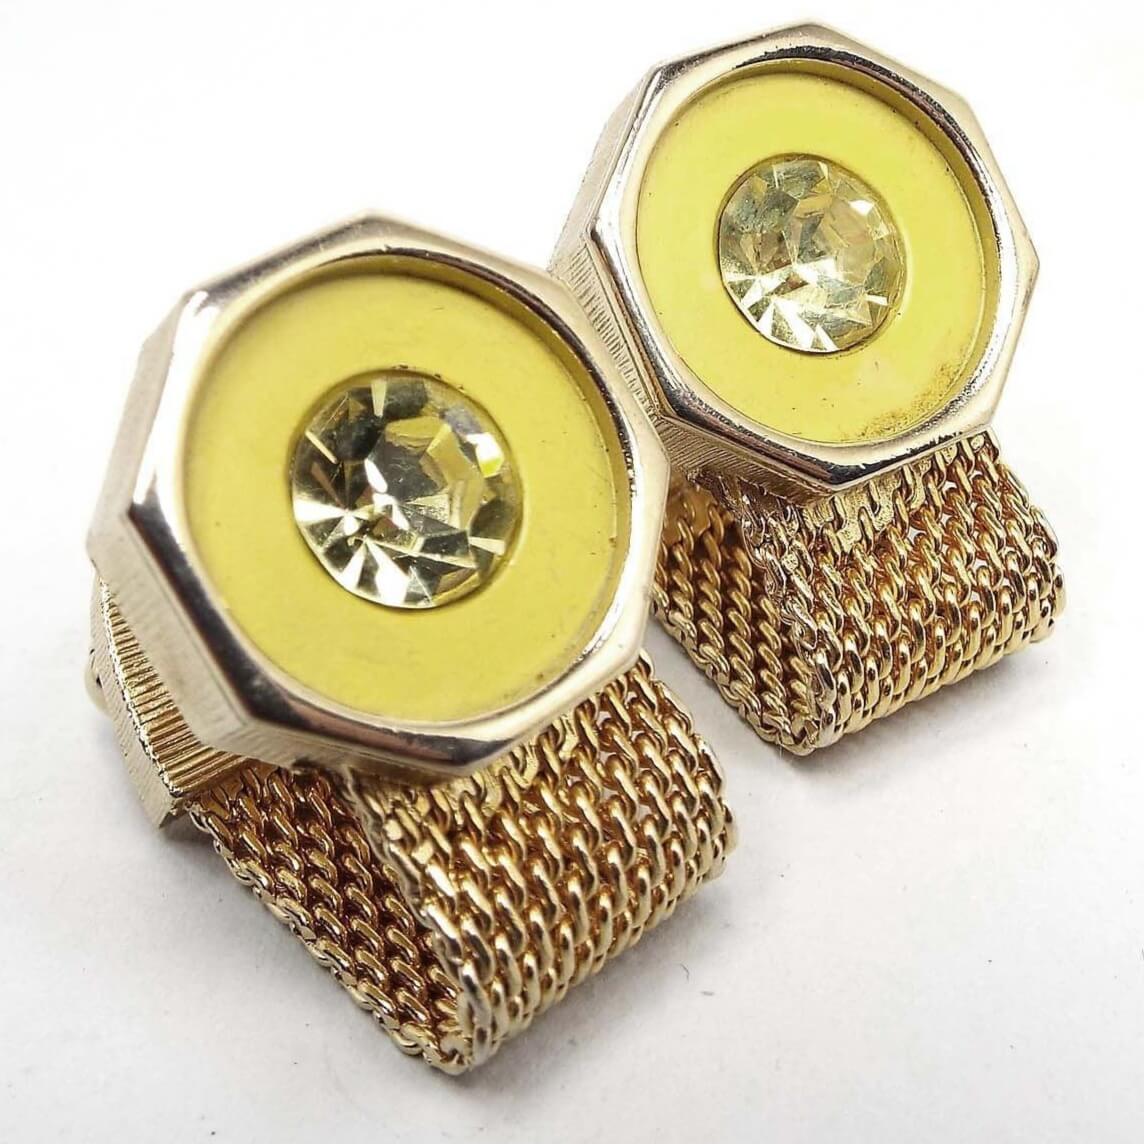 Angled front and side view of the retro vintage Swank wrap around cufflinks. The metal is gold tone in color. The tops are octagon shaped with yellow glass insets and light yellow round rhinestones. The bottoms have mesh chain that is wide and curves around to the backs.